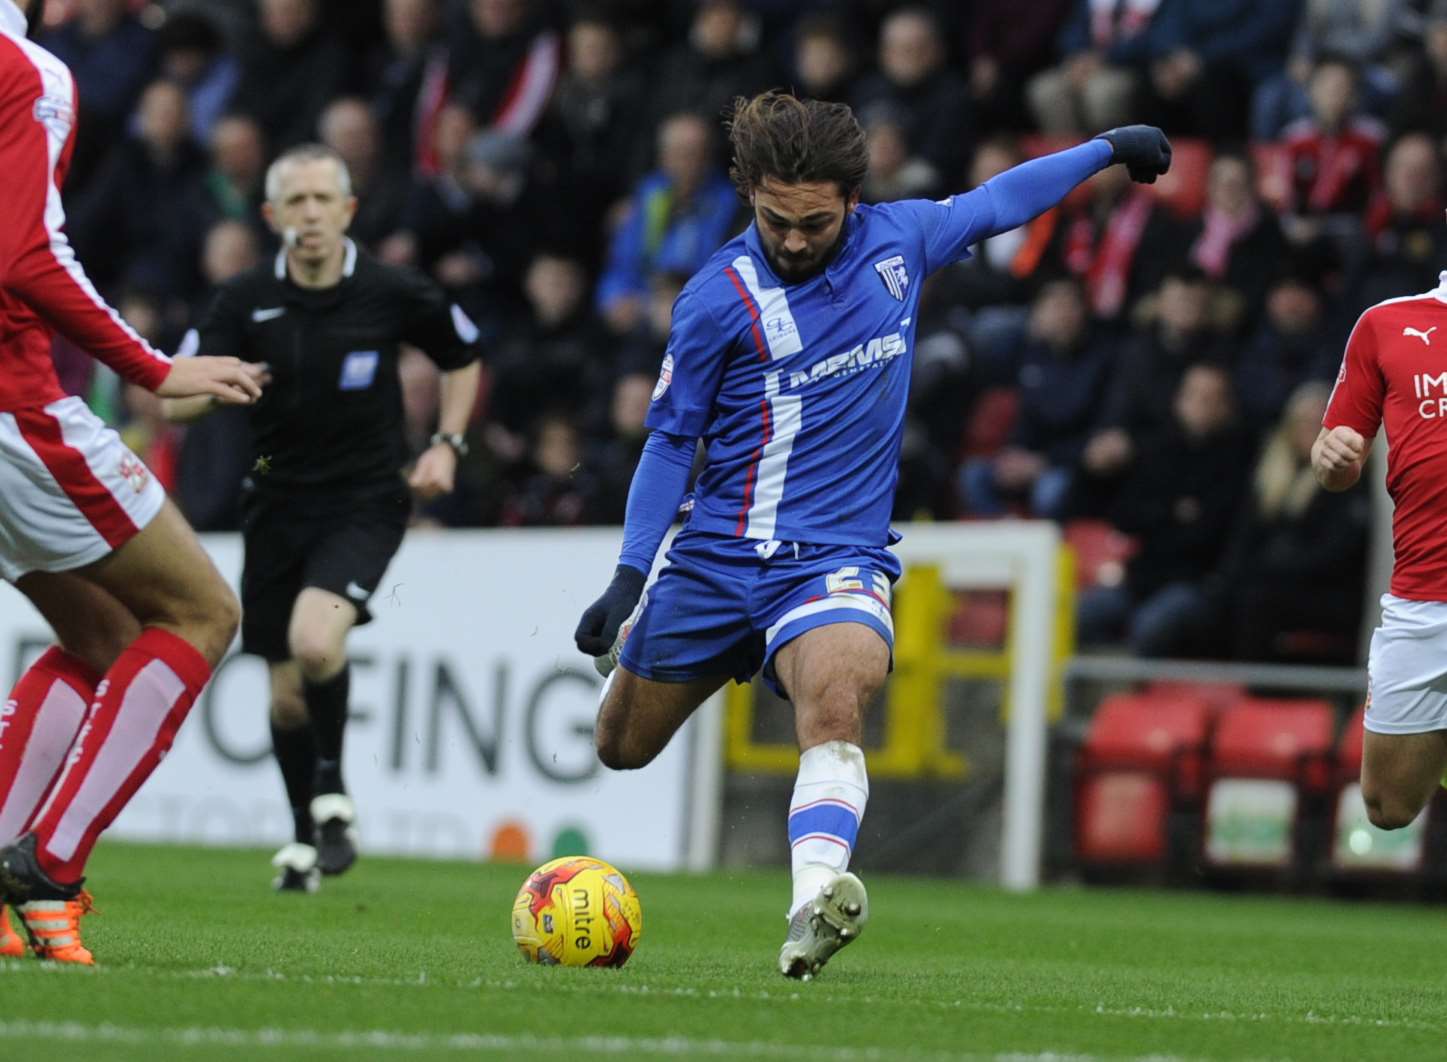 Bradley Dack nets against Swindon Town Picture: Barry Goodwin